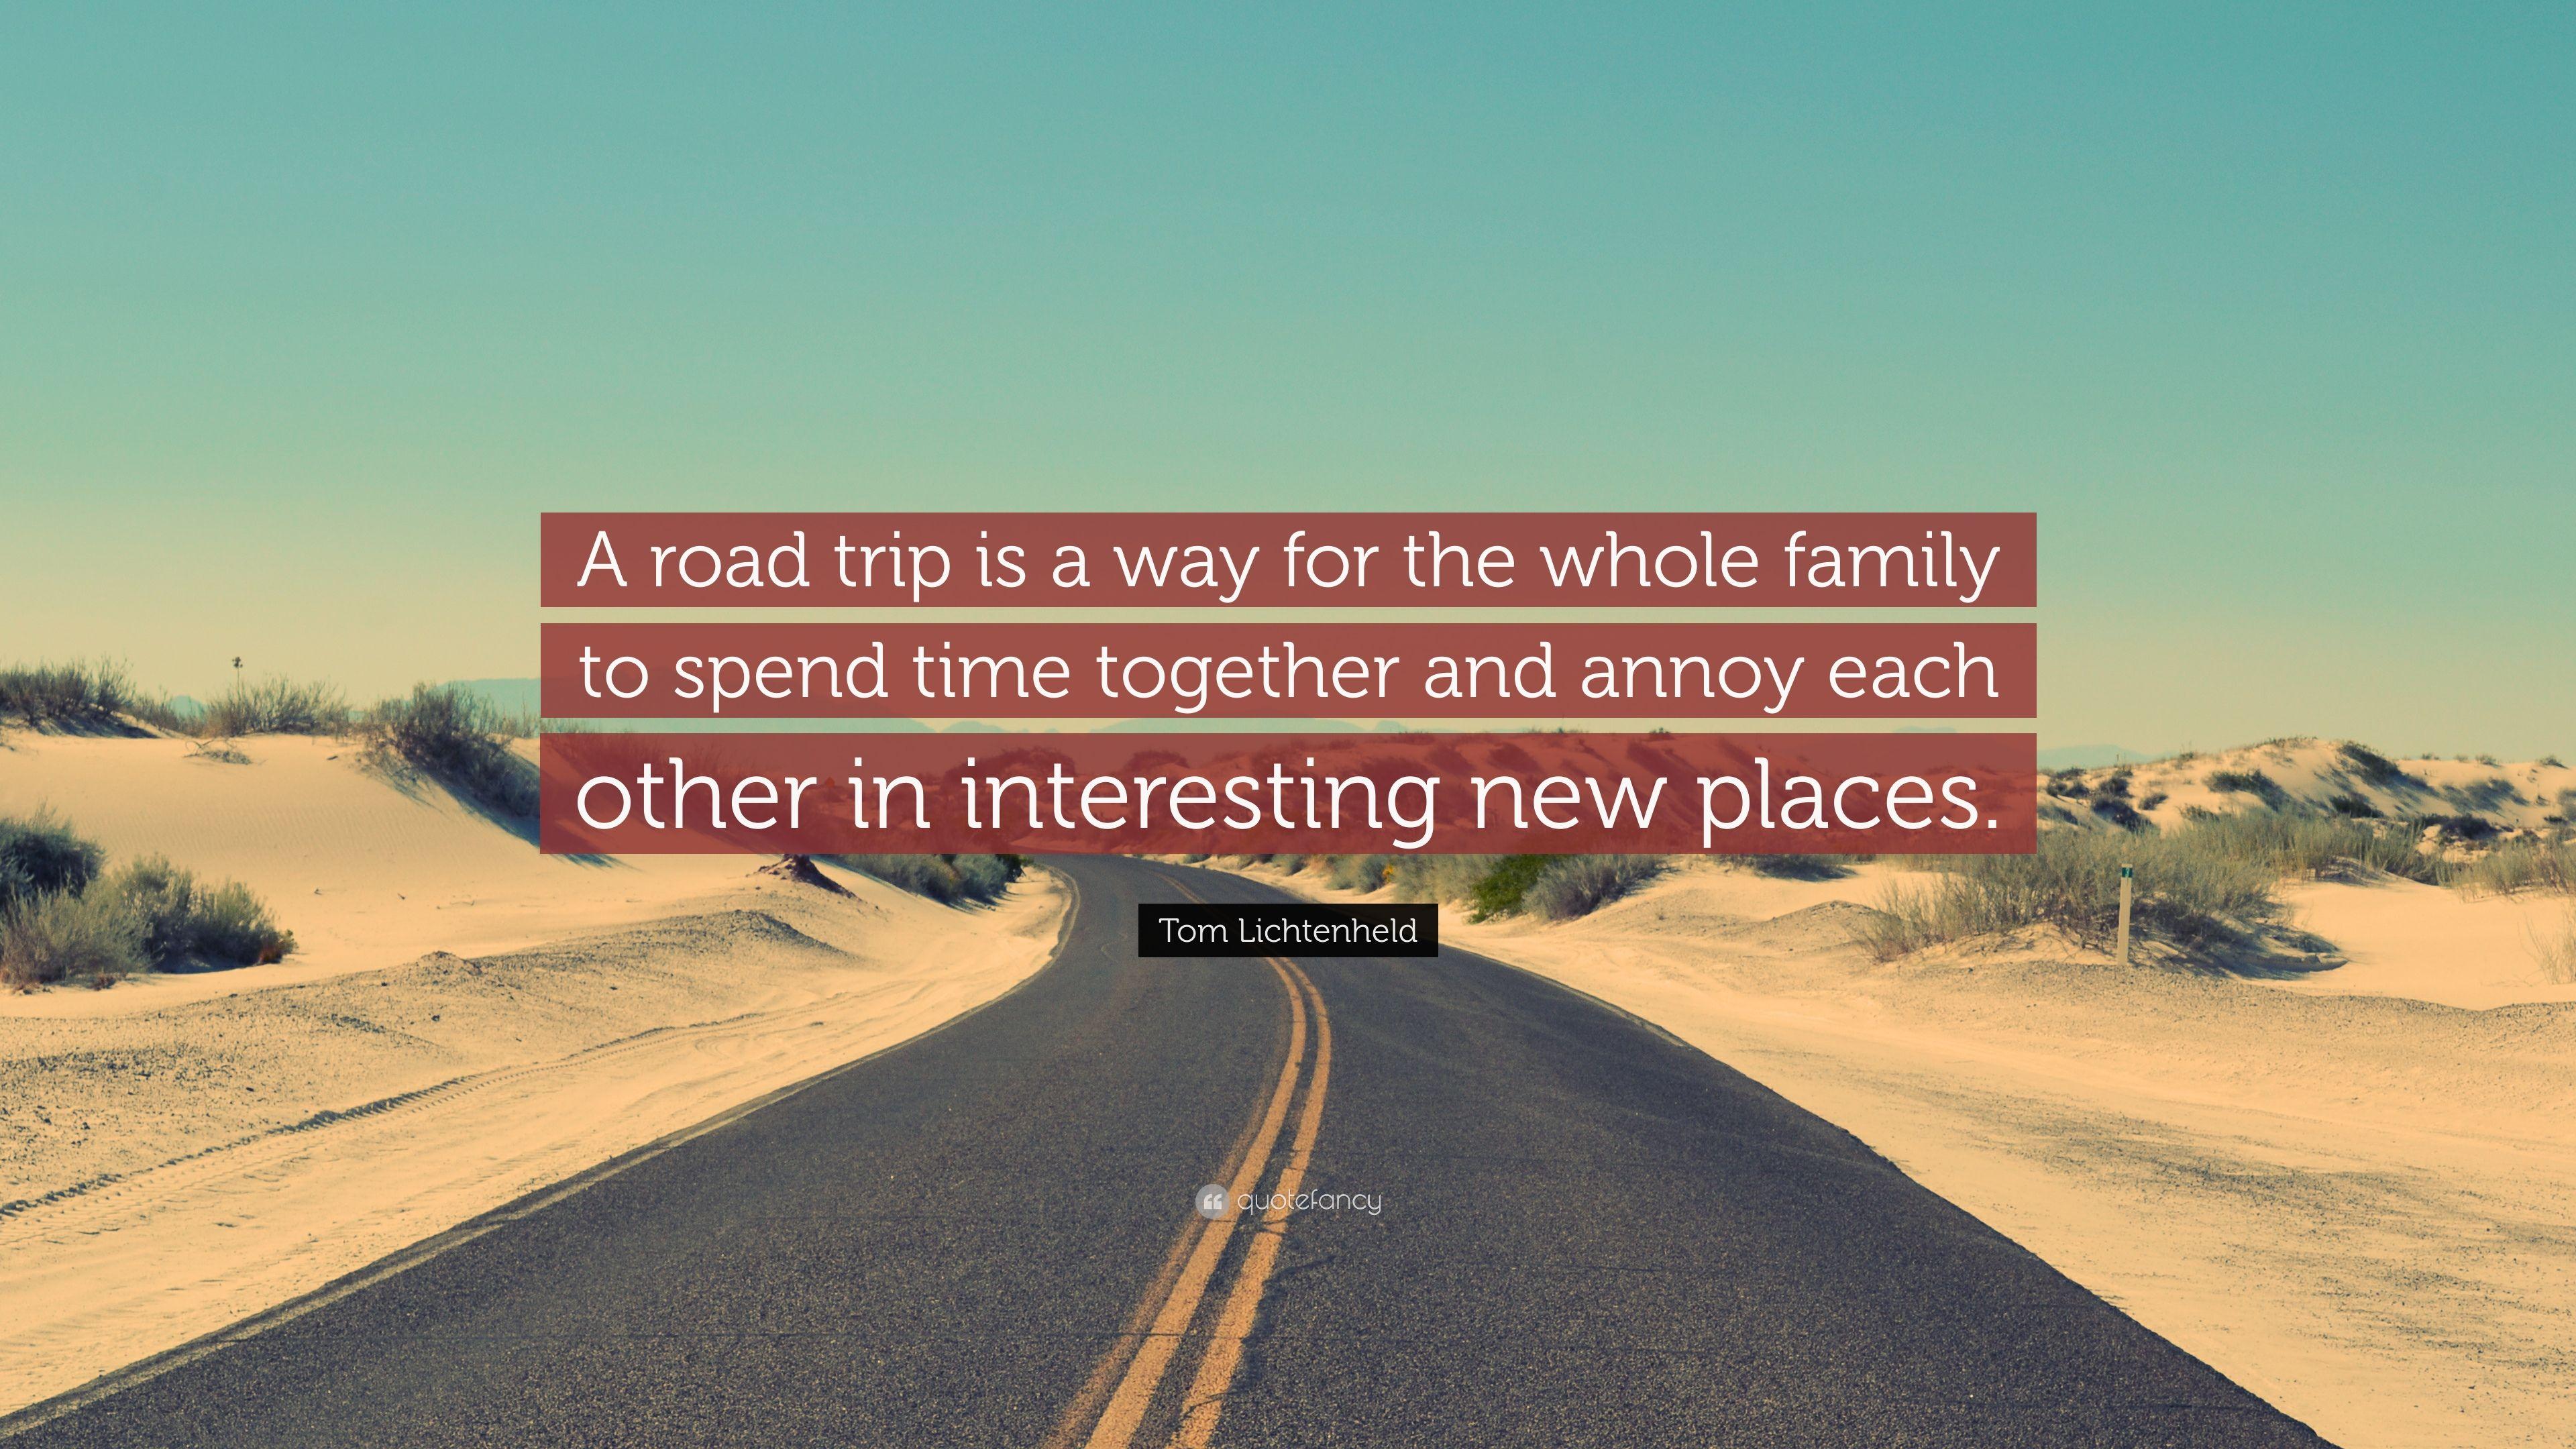 Tom Lichtenheld Quote: “A road trip is a way for the whole family to